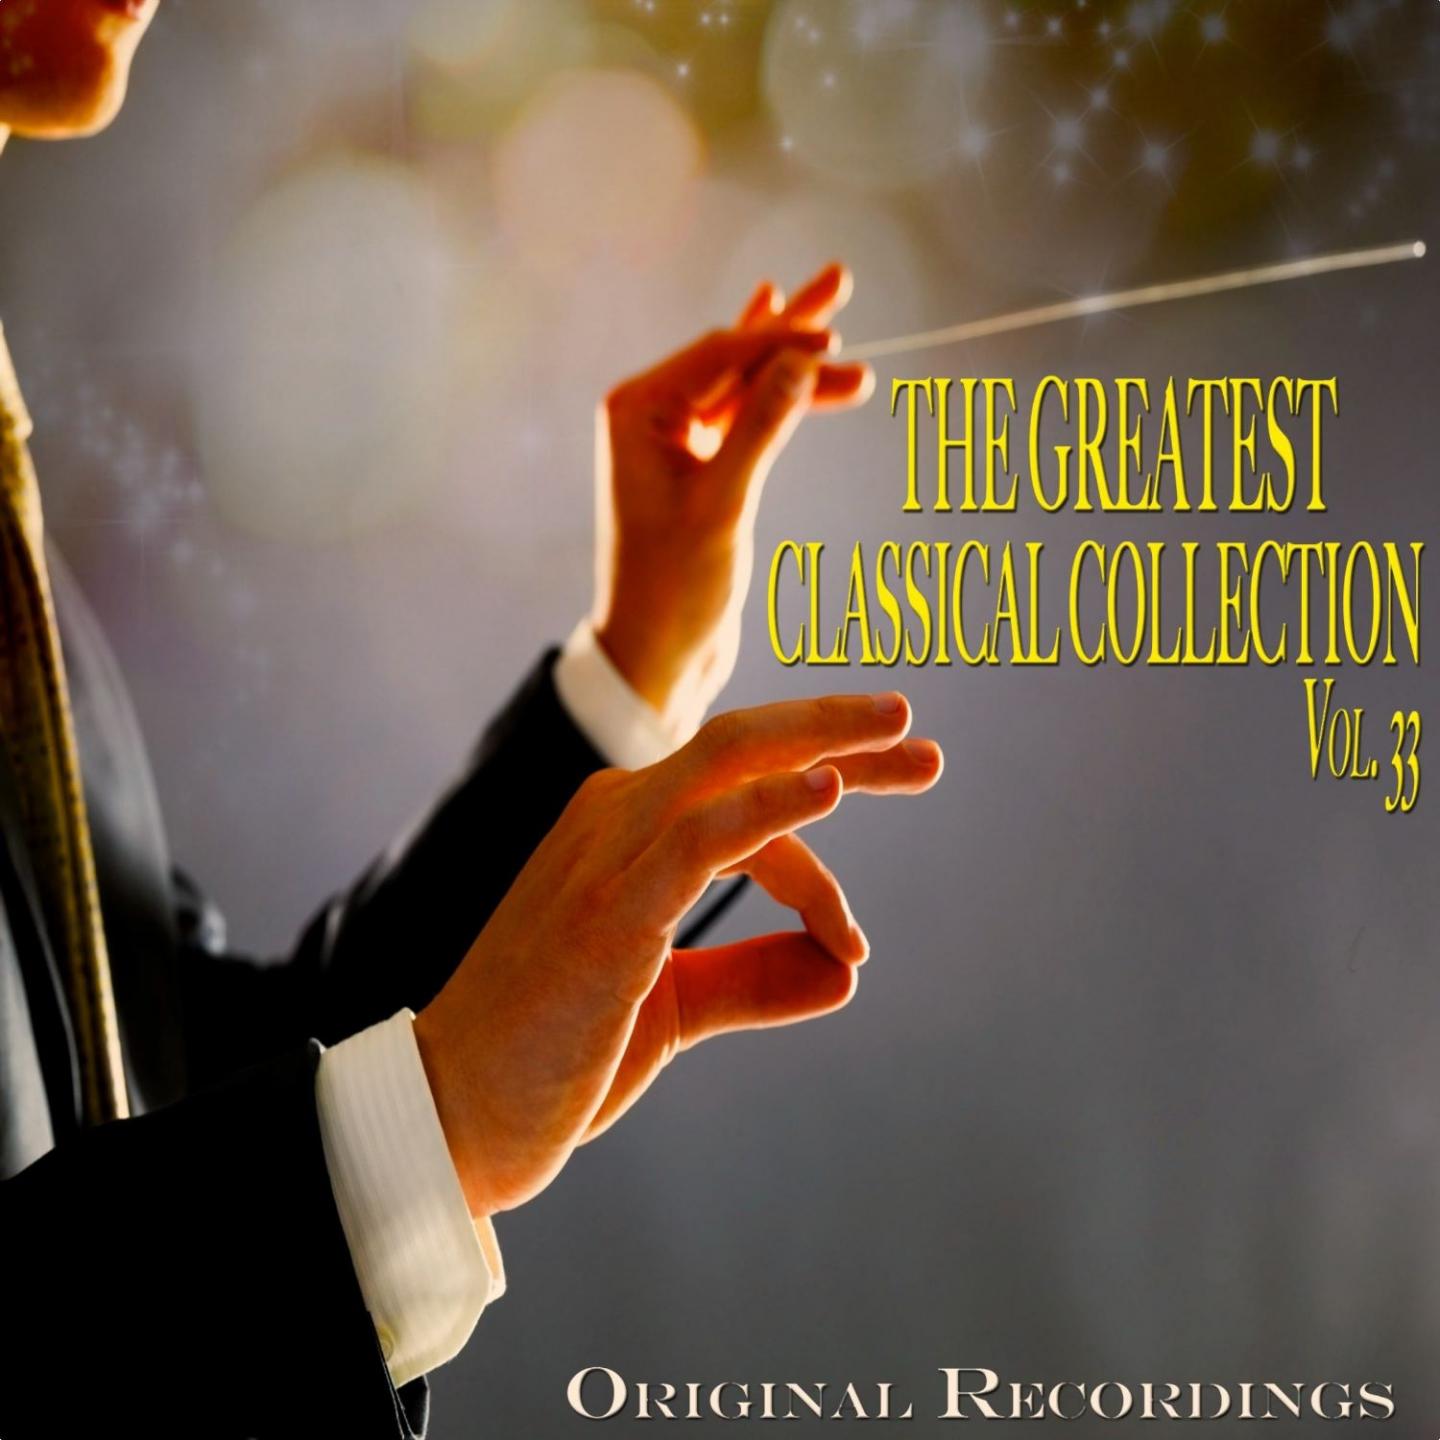 The Greatest Classical Collection Vol. 33